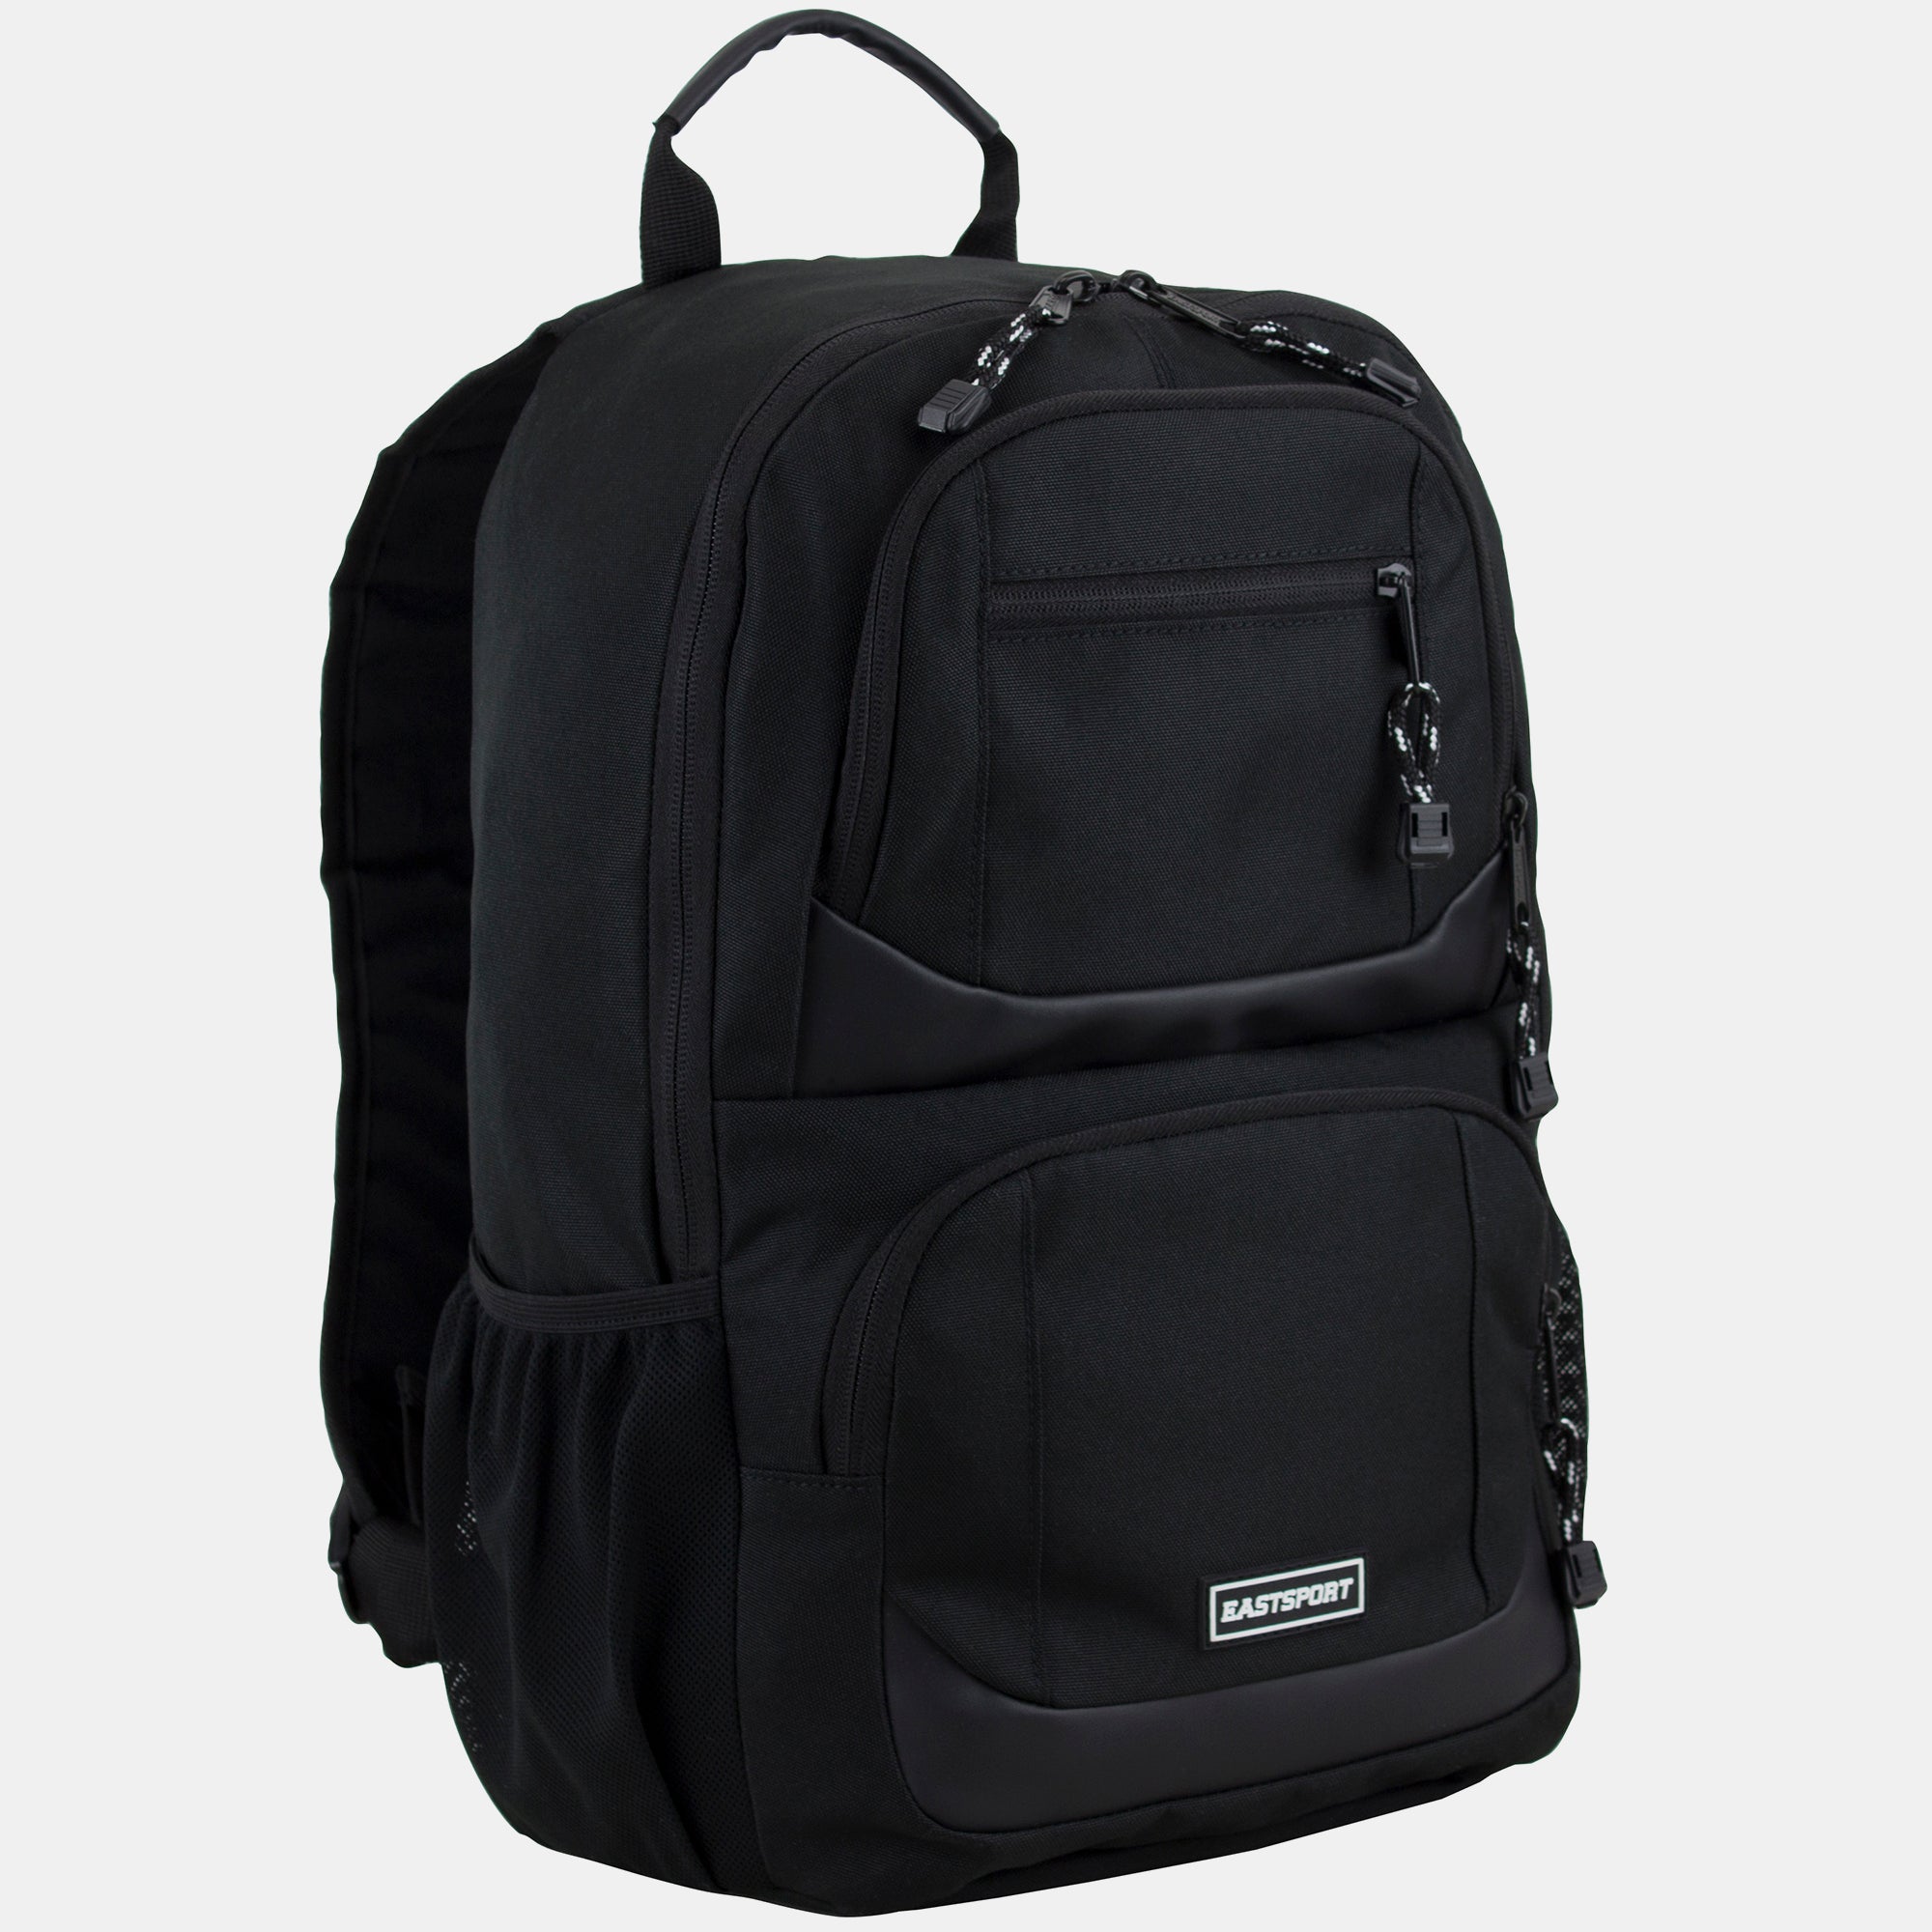 Commuter Convertible Backpack in BLACK